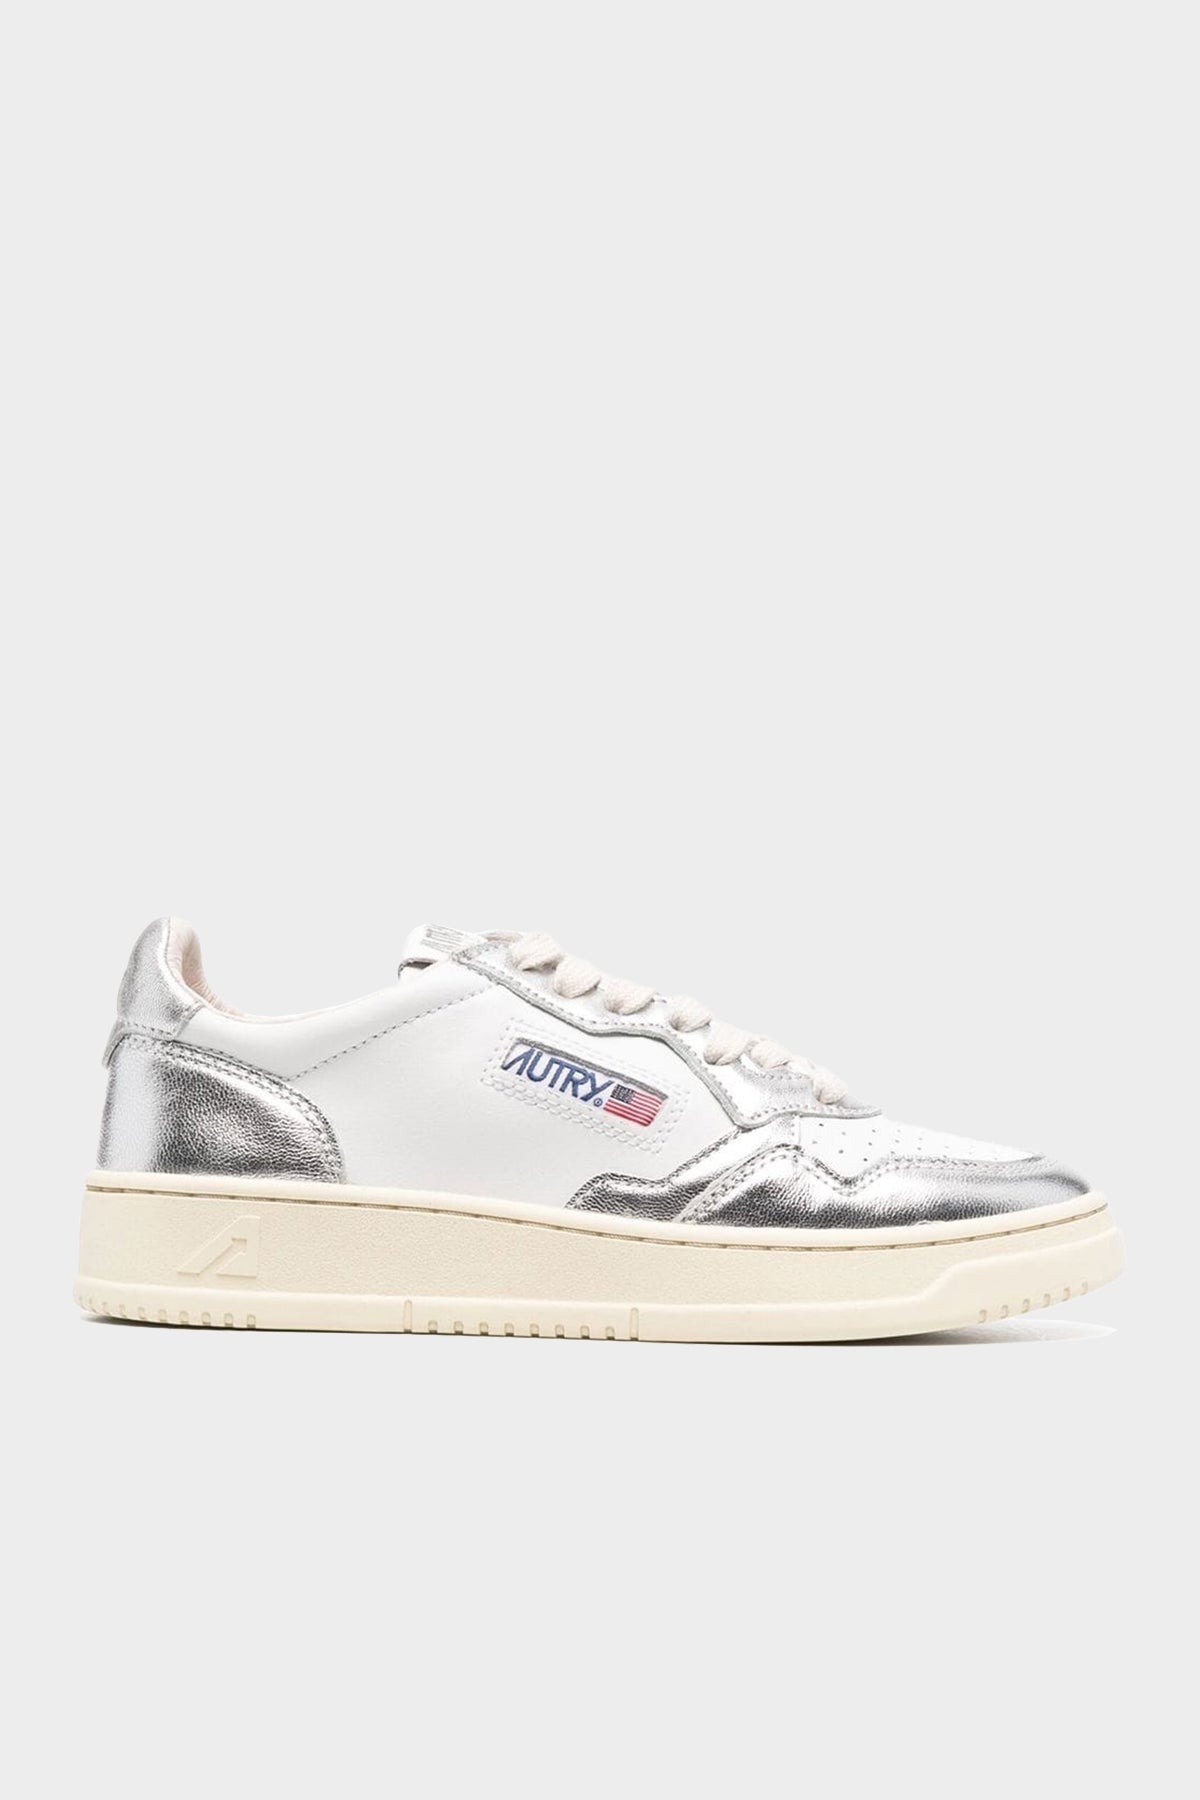 Two-Tone Medalist Low Leather Sneaker in White and Silver - shop-olivia.com